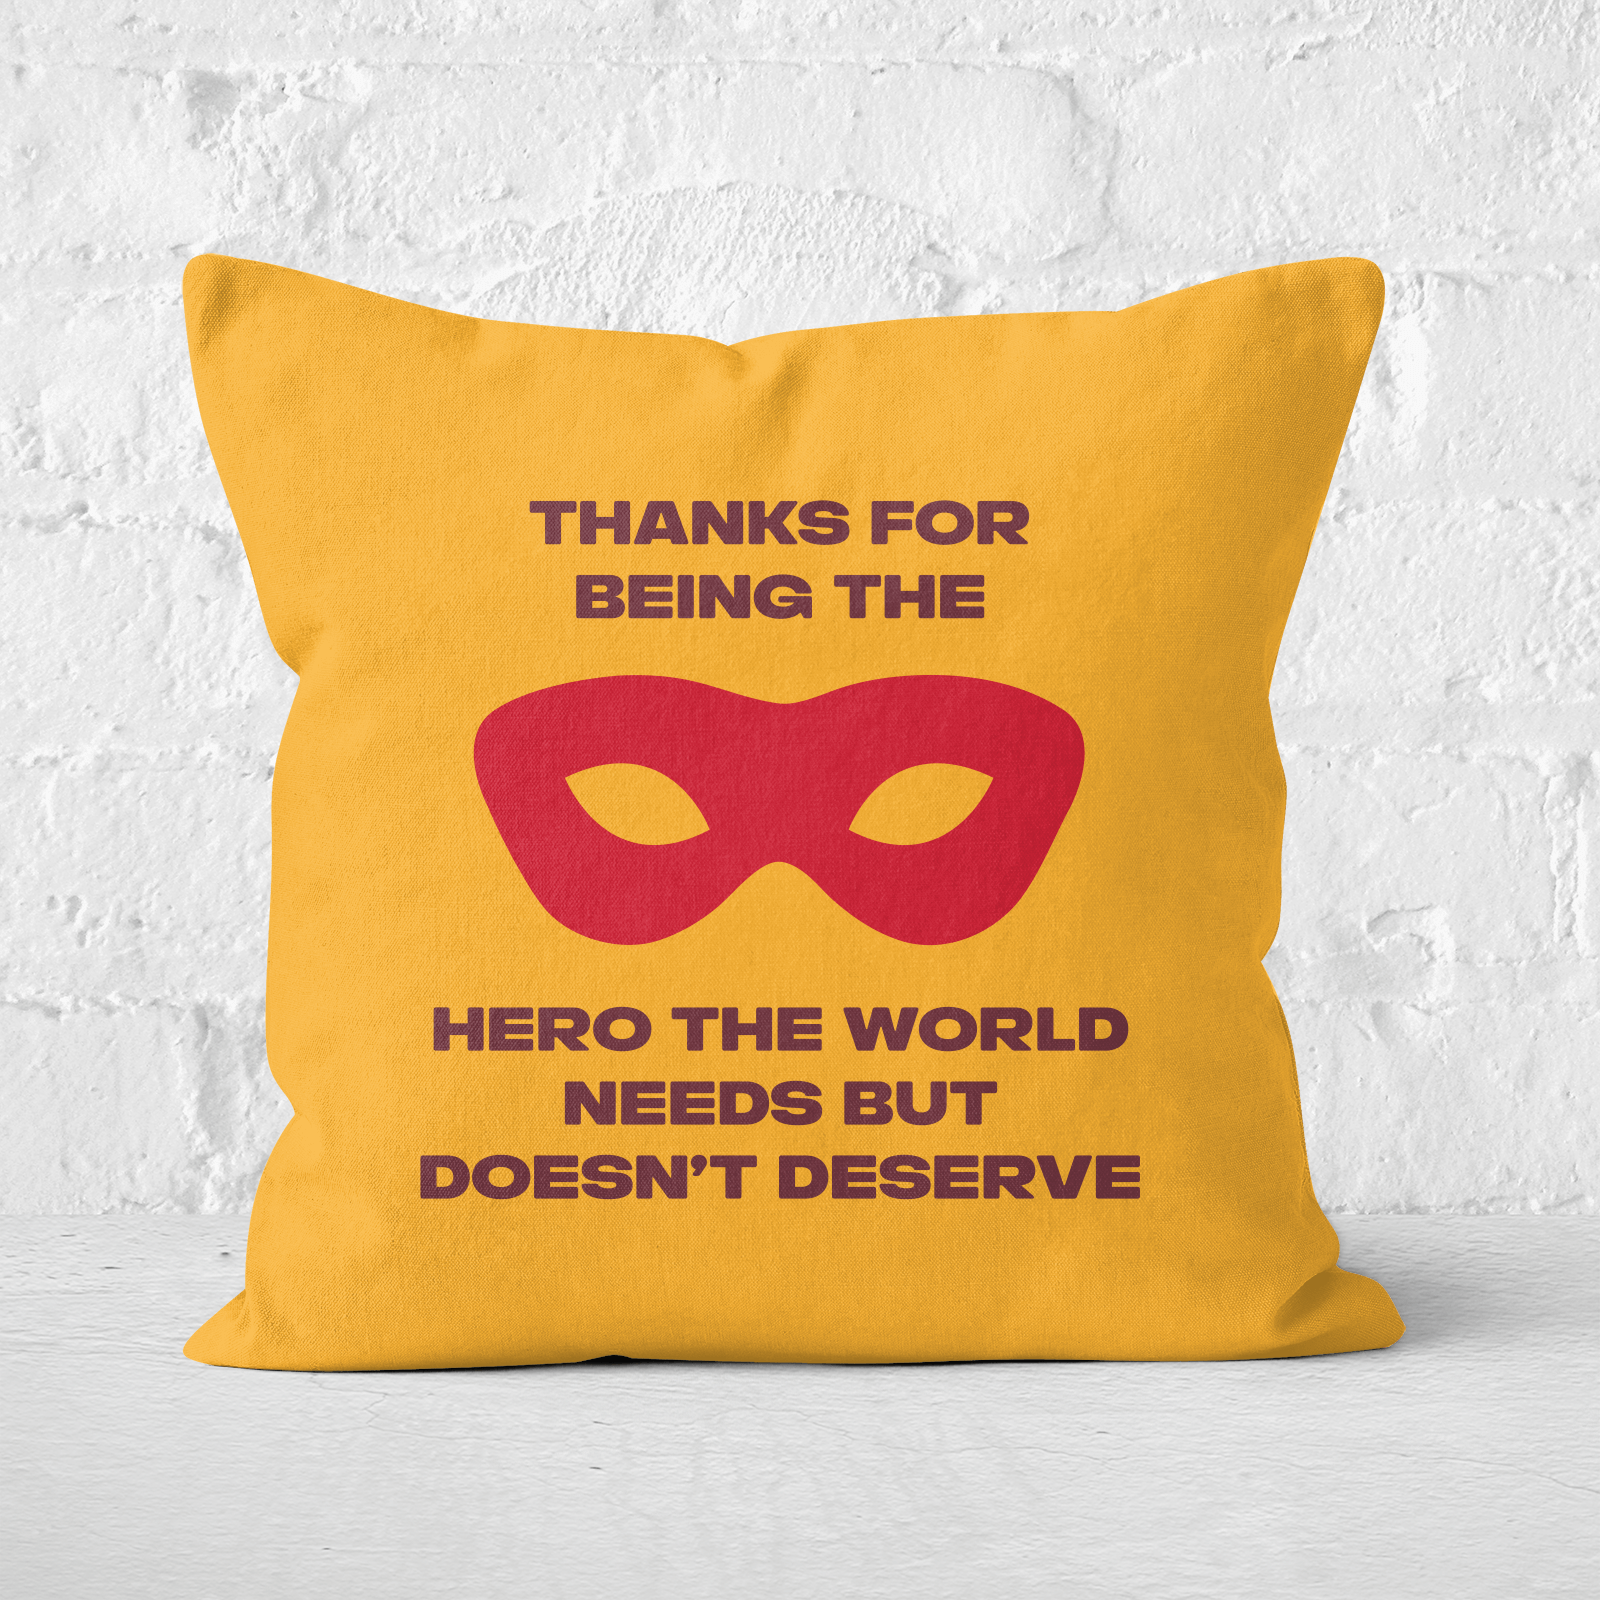 Thanks For Being A Hero! Square Cushion - 60x60cm - Soft Touch